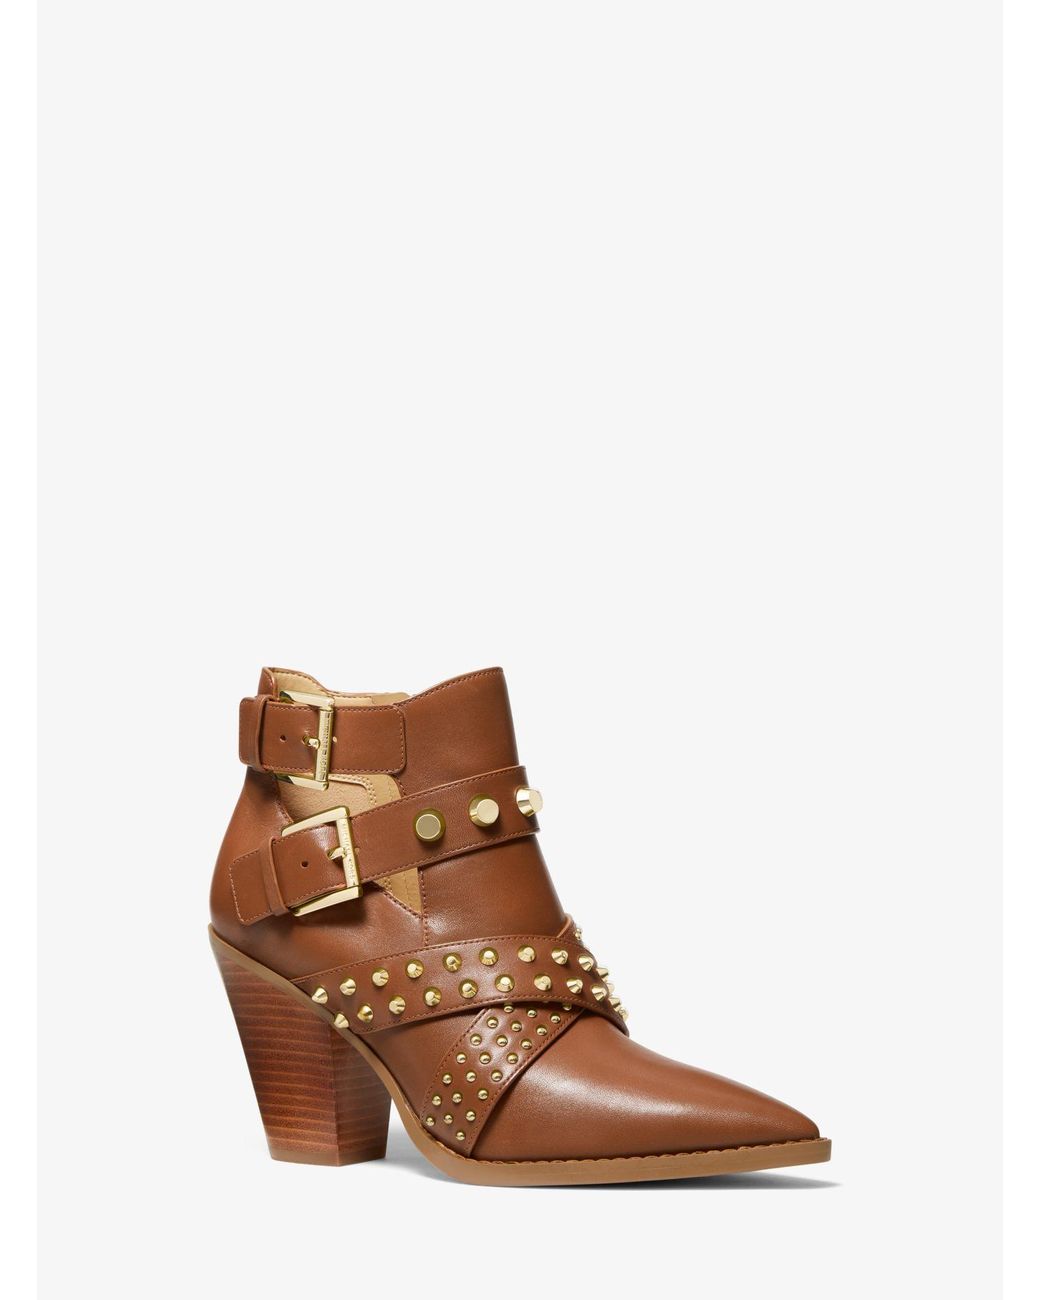 Michael Kors Dover Astor Stud Leather Ankle Boot in Brown | Lyst